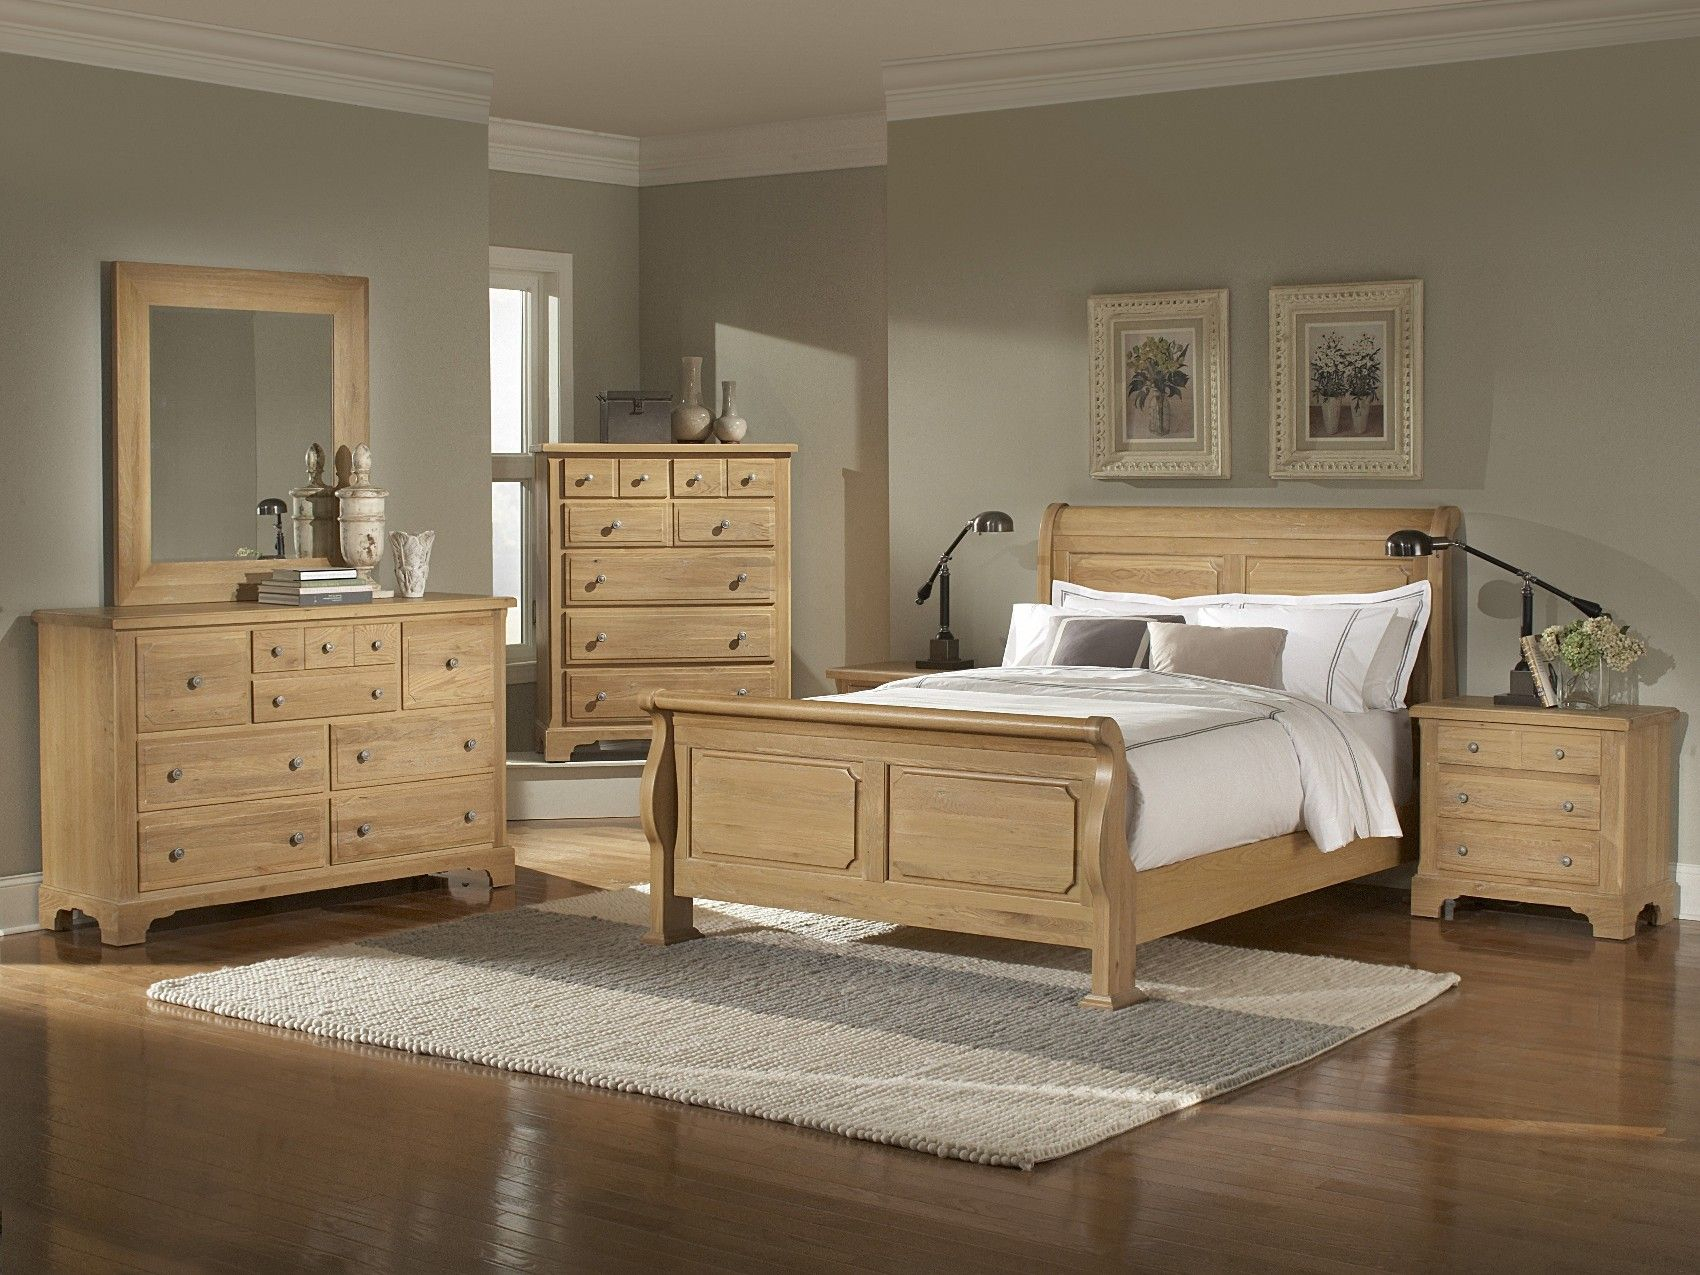 Oak Bedroom Furniture Sets Washed Oak Queen Sleigh Bedroom throughout dimensions 1700 X 1275